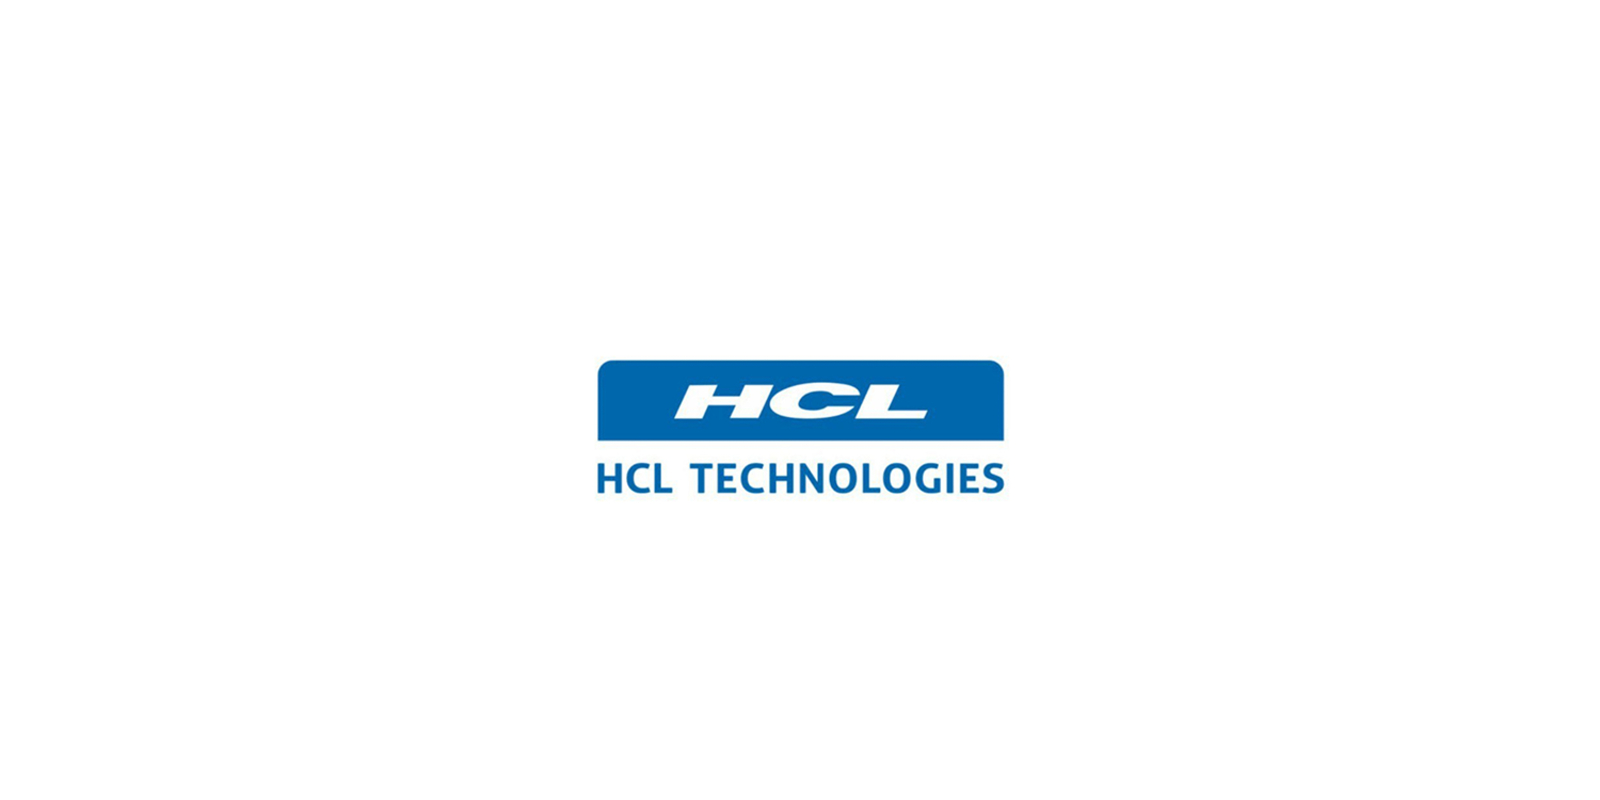 HCL's Digital Open Innovation: Enhancing Business Model Effectiveness through Talent and Customer Acquisition, Development, and Retention